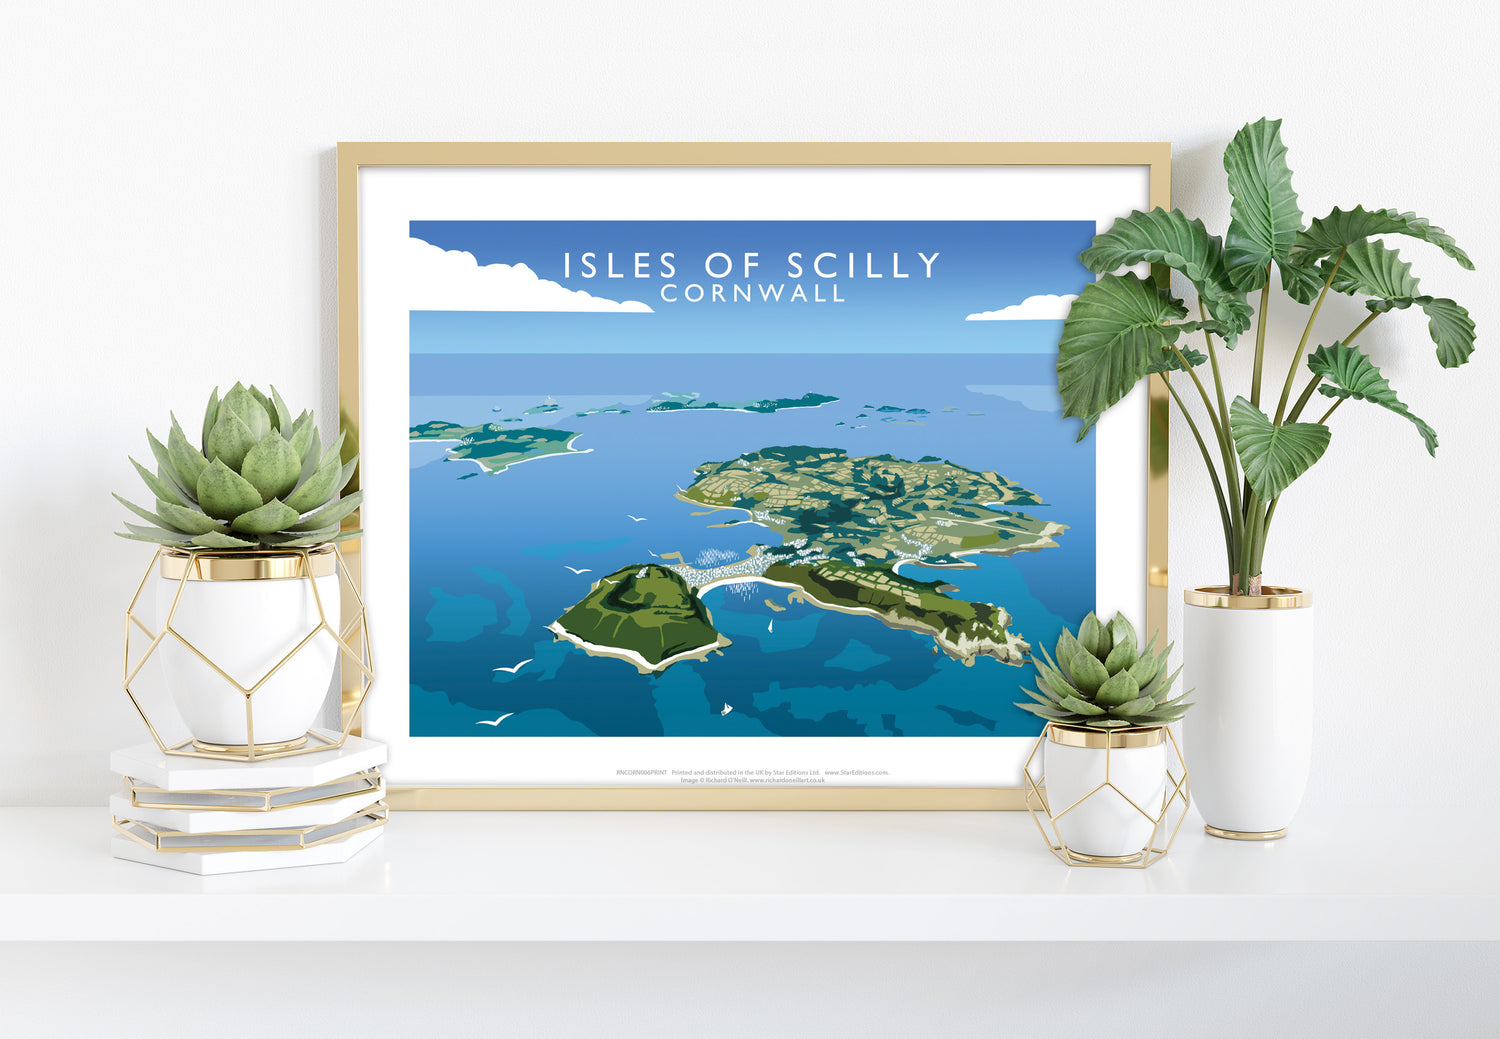 Isles of Scilly, Cornwall - Art Print